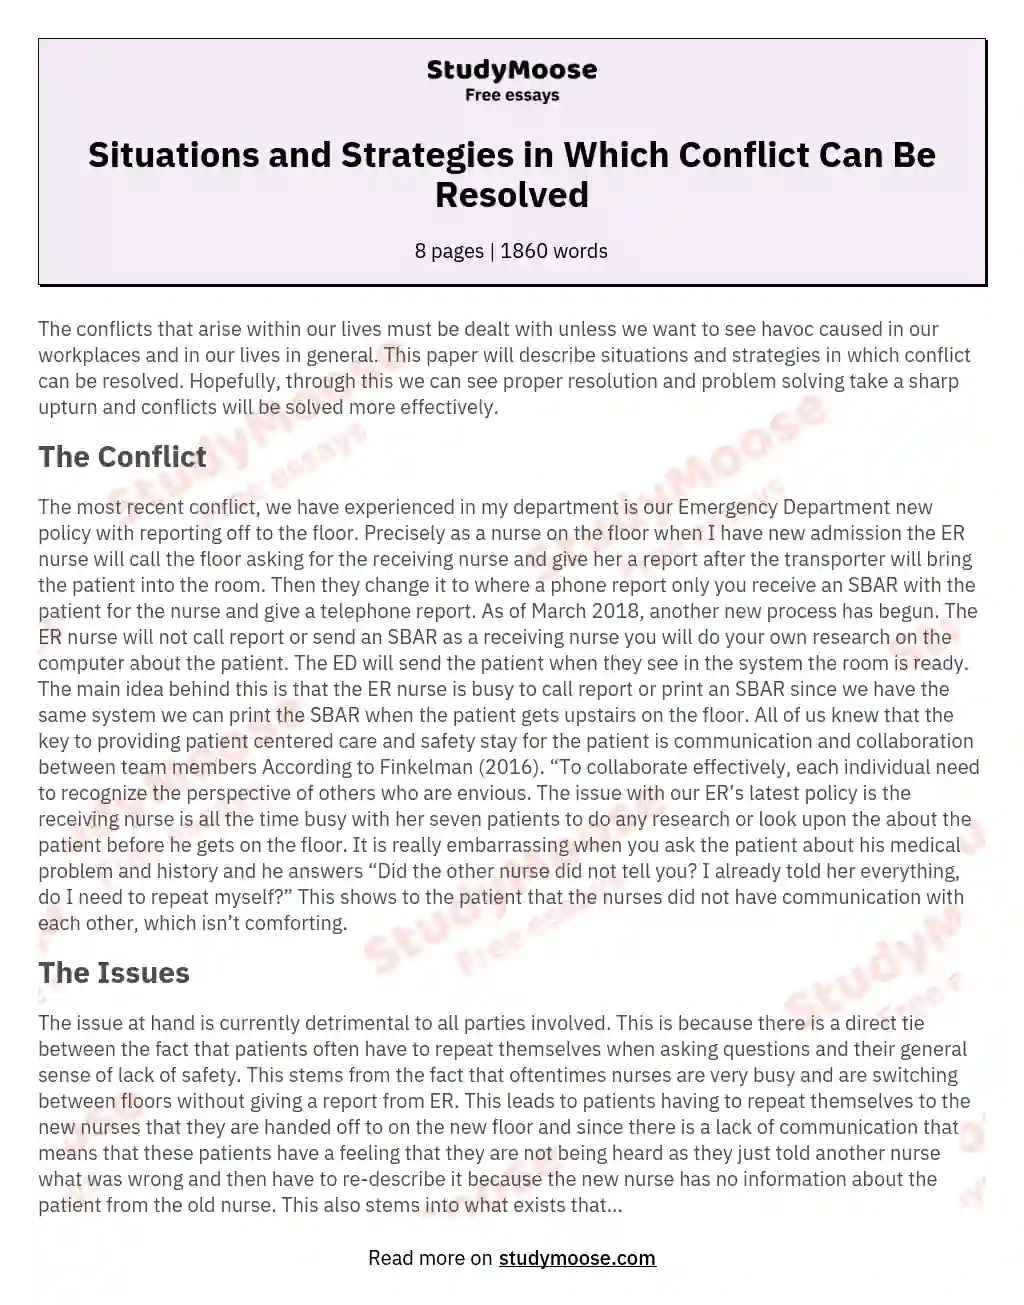 Situations and Strategies in Which Conflict Can Be Resolved essay